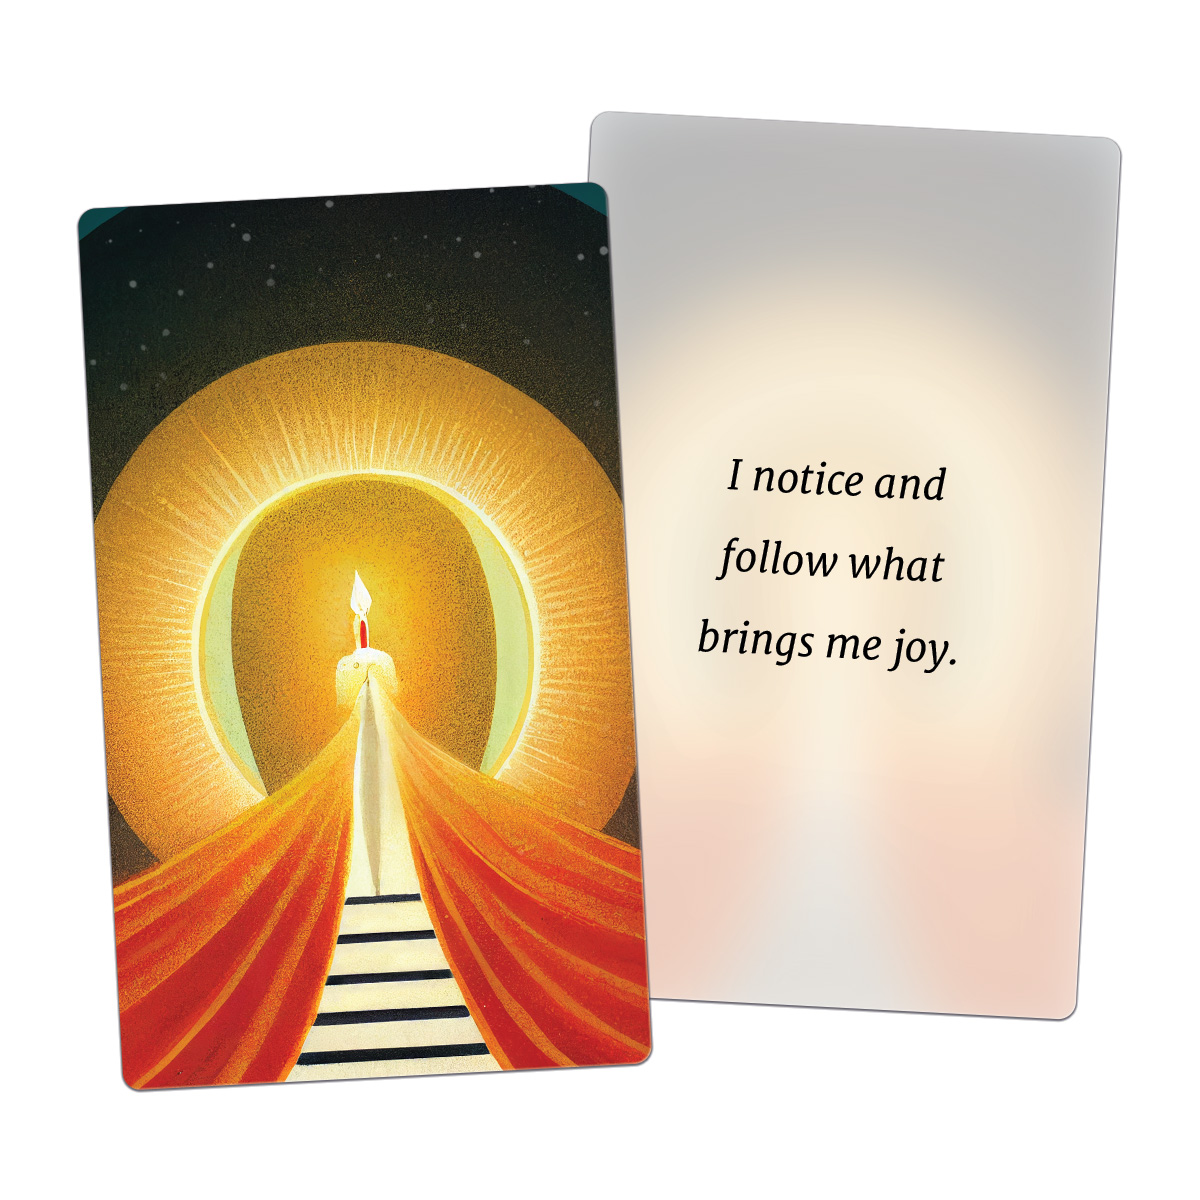 I notice and follow what brings me joy. (AFFIRMATION CARD)